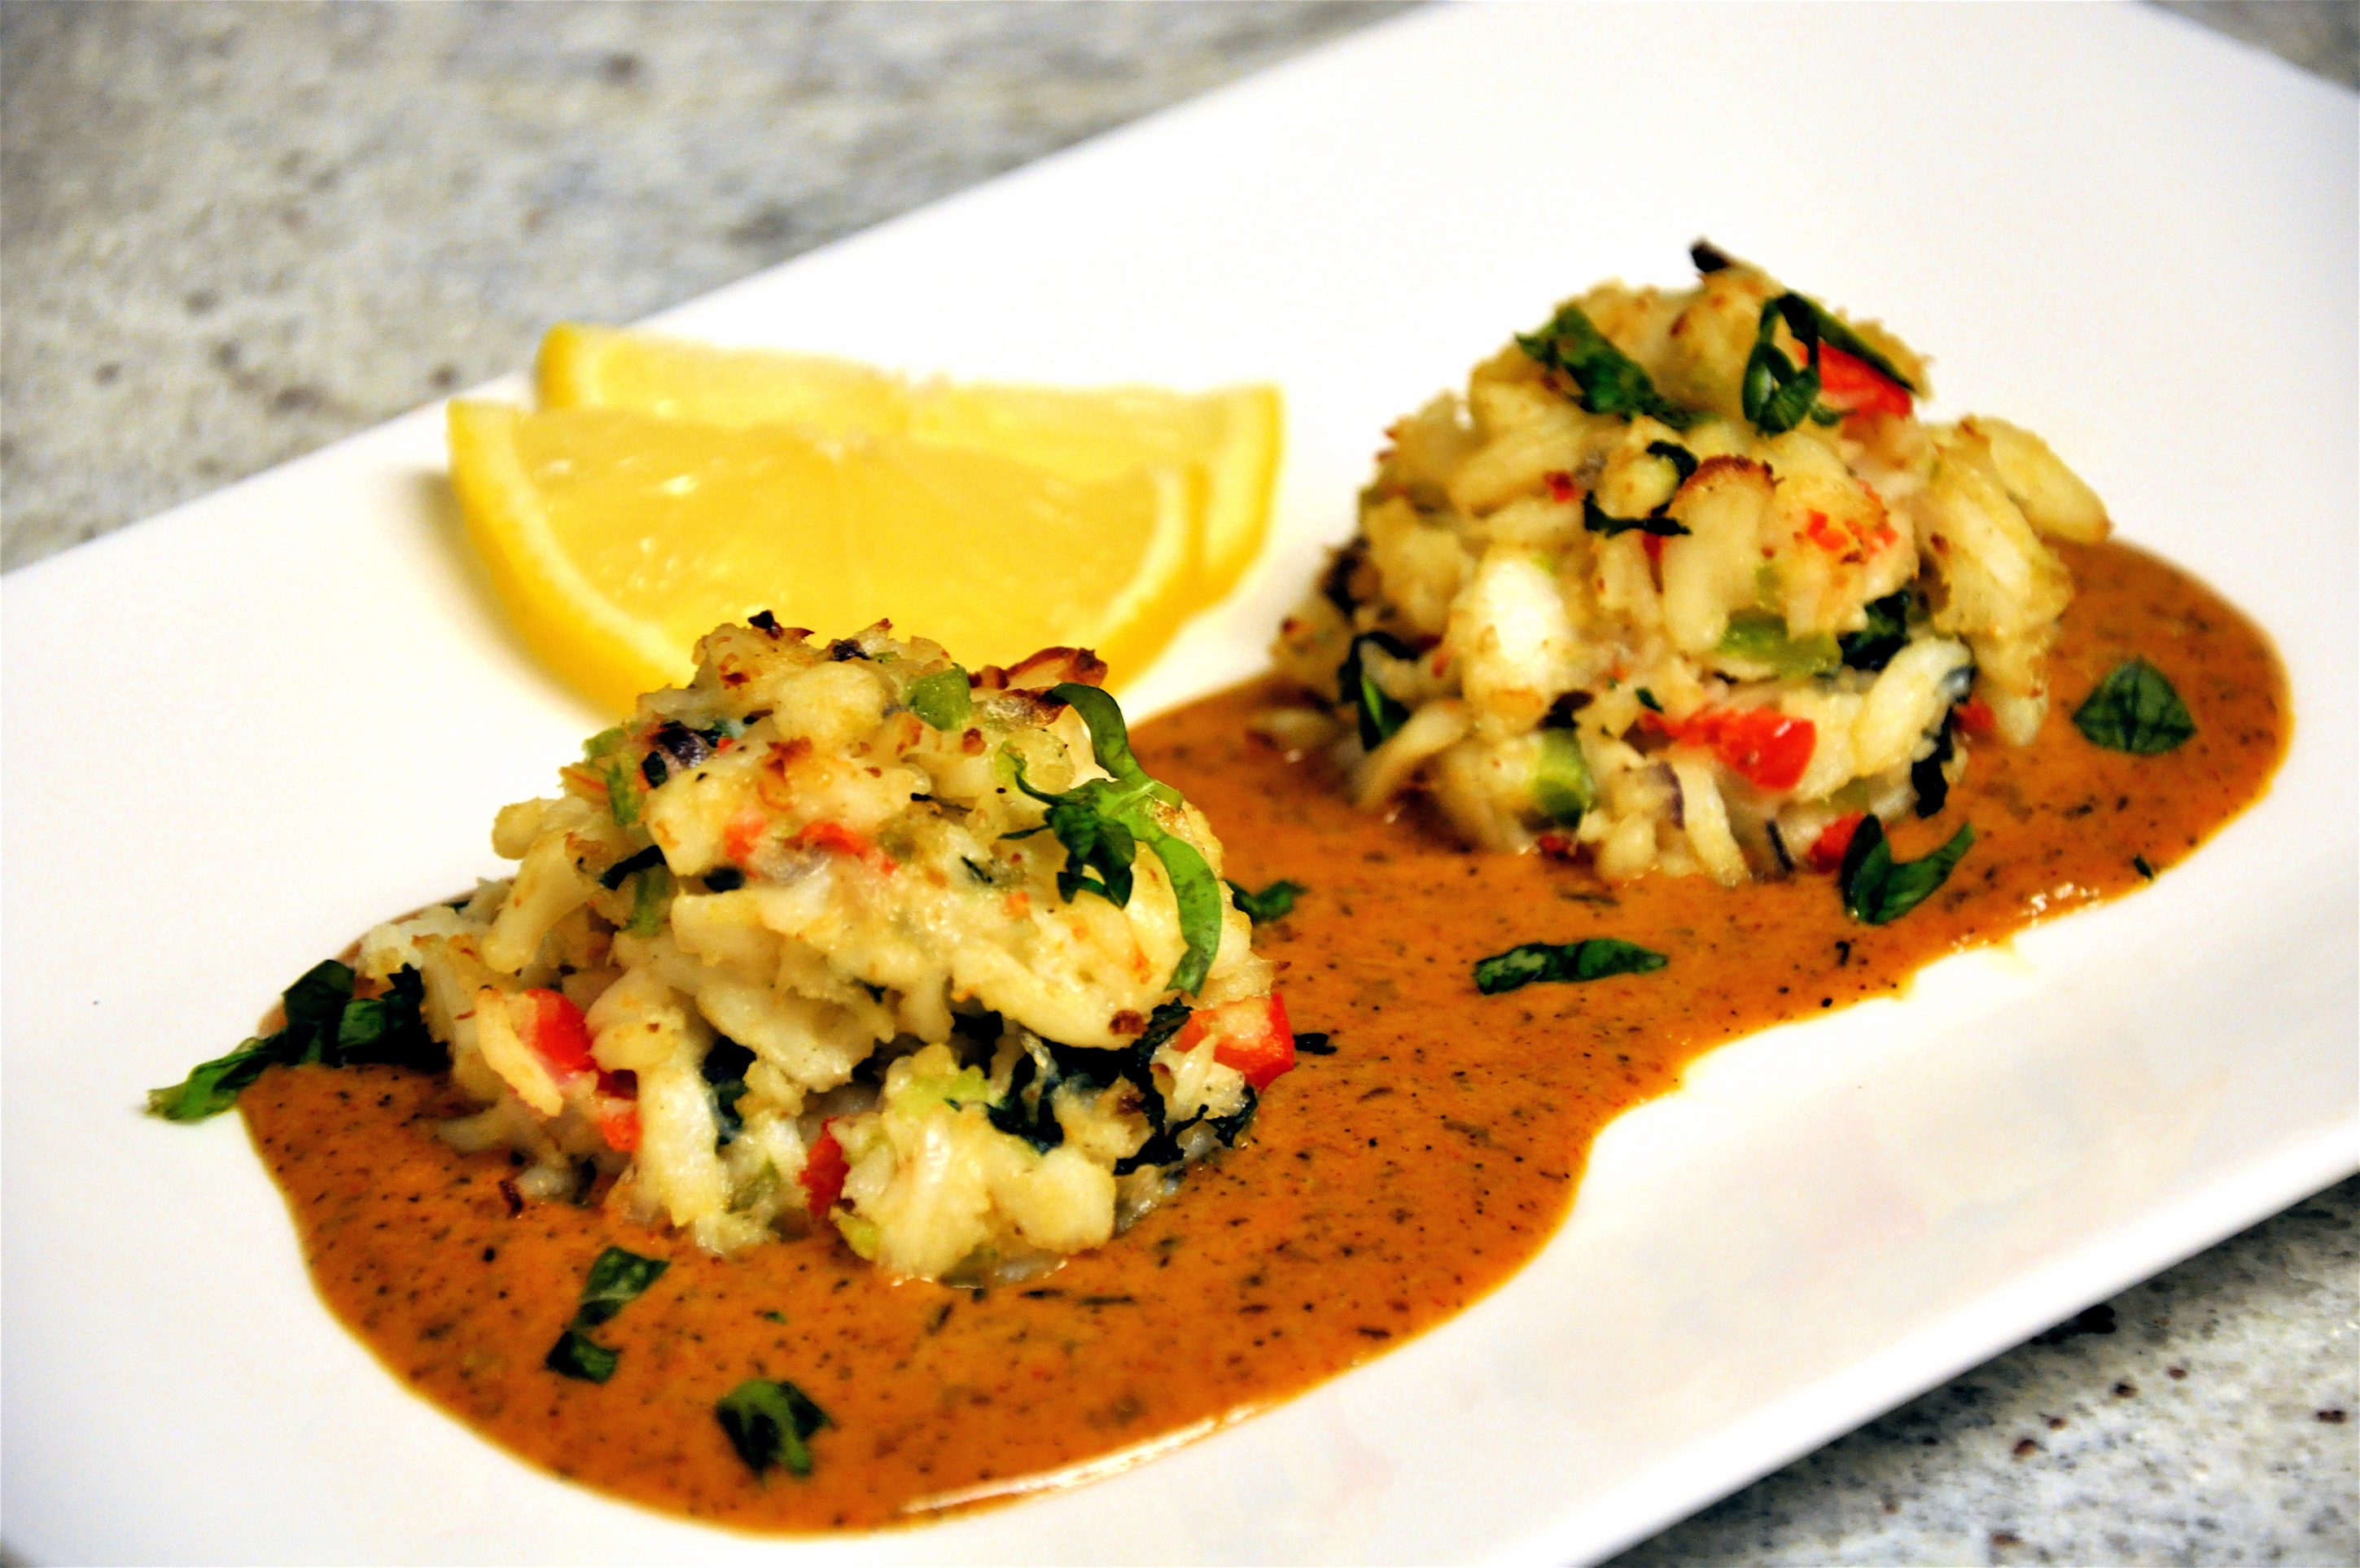 Crab Cakes with Lobster Sauce